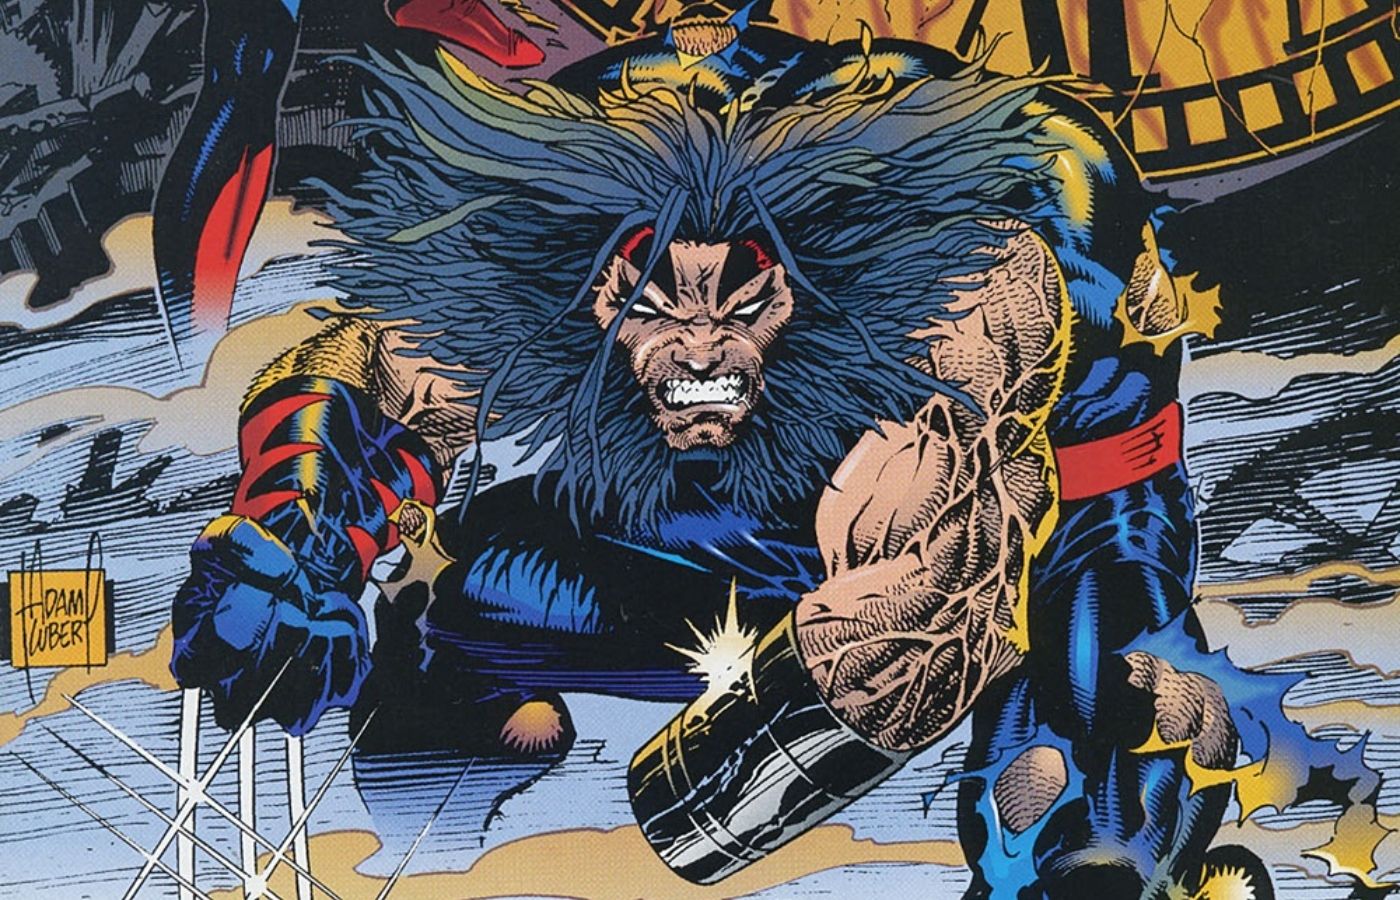 Wolverine aka Weapon X from the Age of Apocalypse.